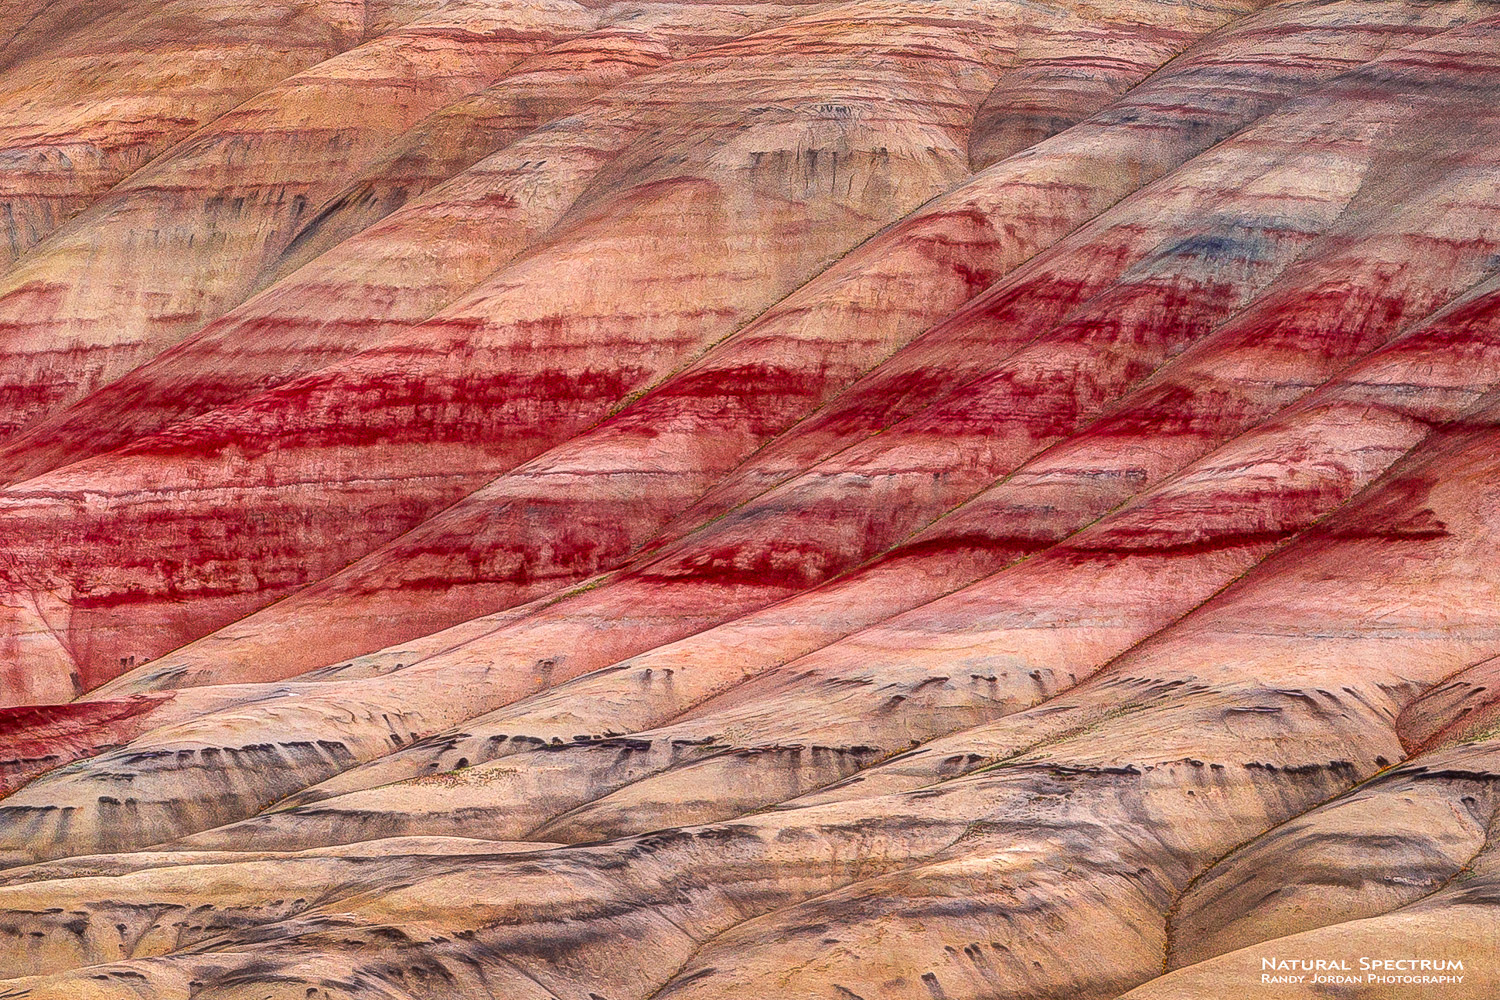 Eons of weathering have exposed layers of iron oxides and other minerals to create what we call the Painted Hills, John Day Fossil...